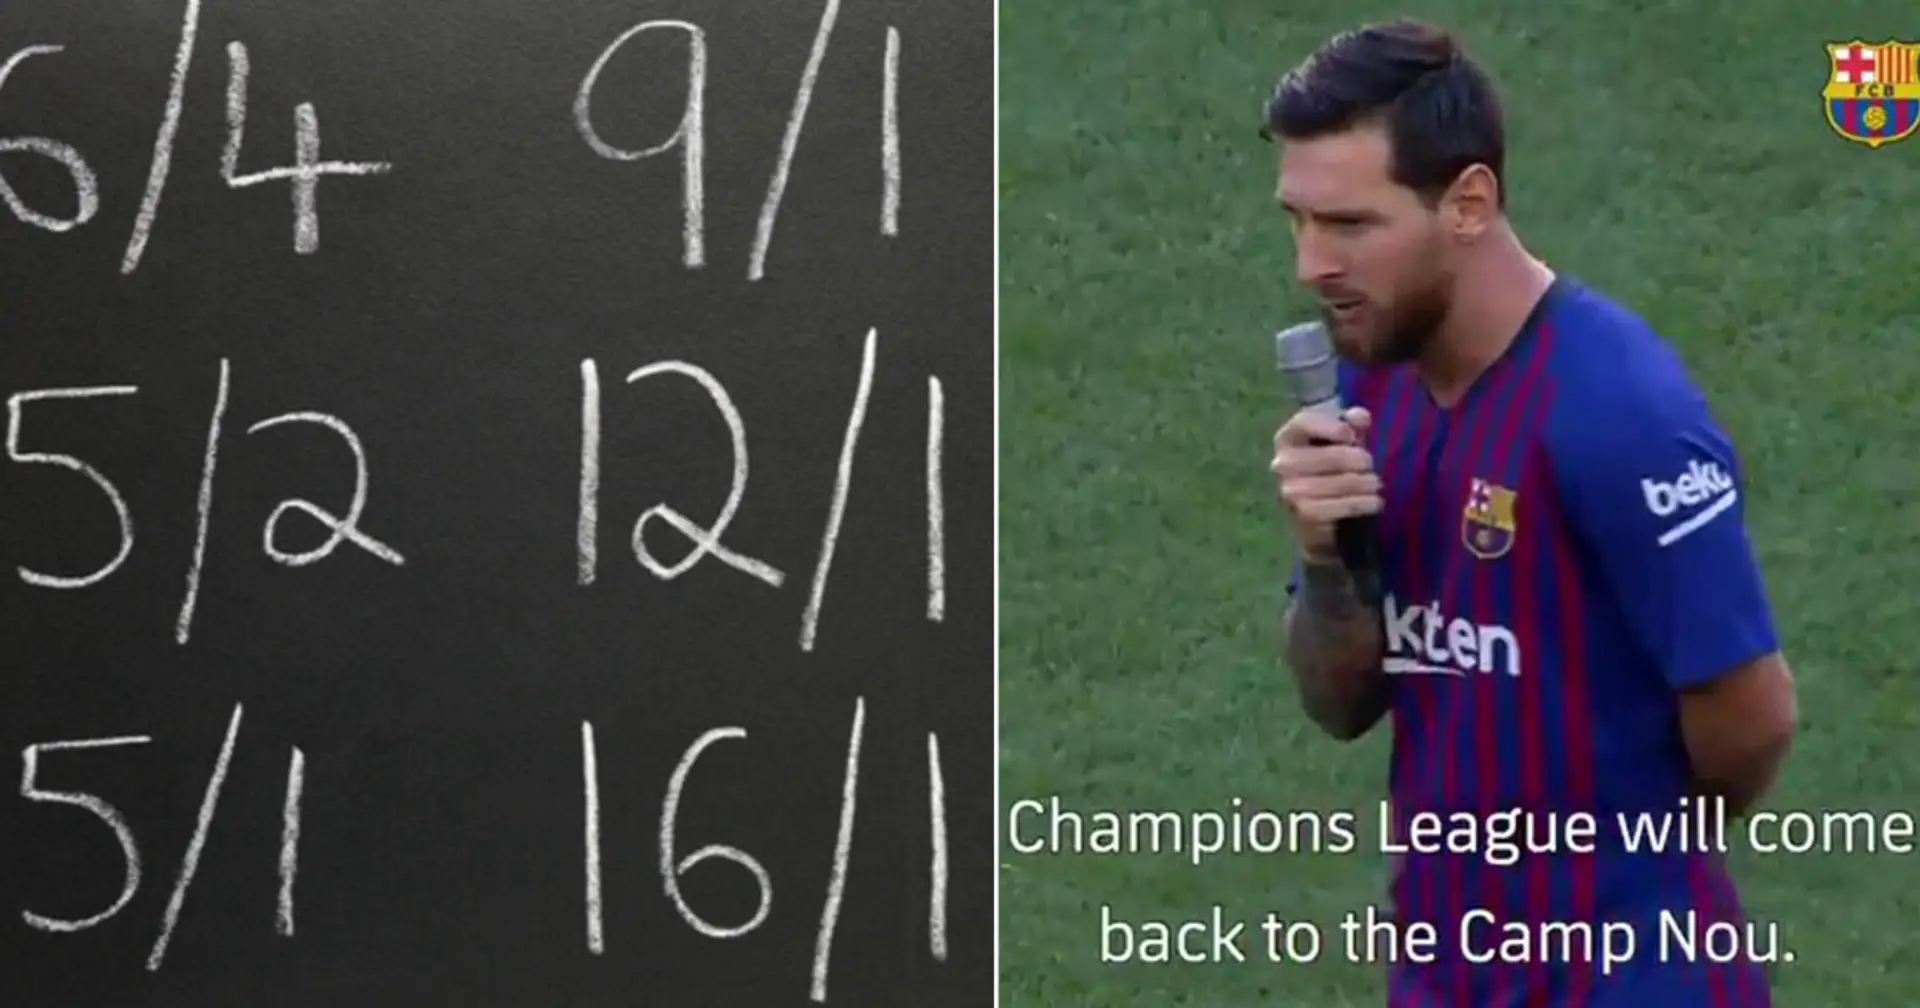 Latest odds of Messi staying at Barca revealed